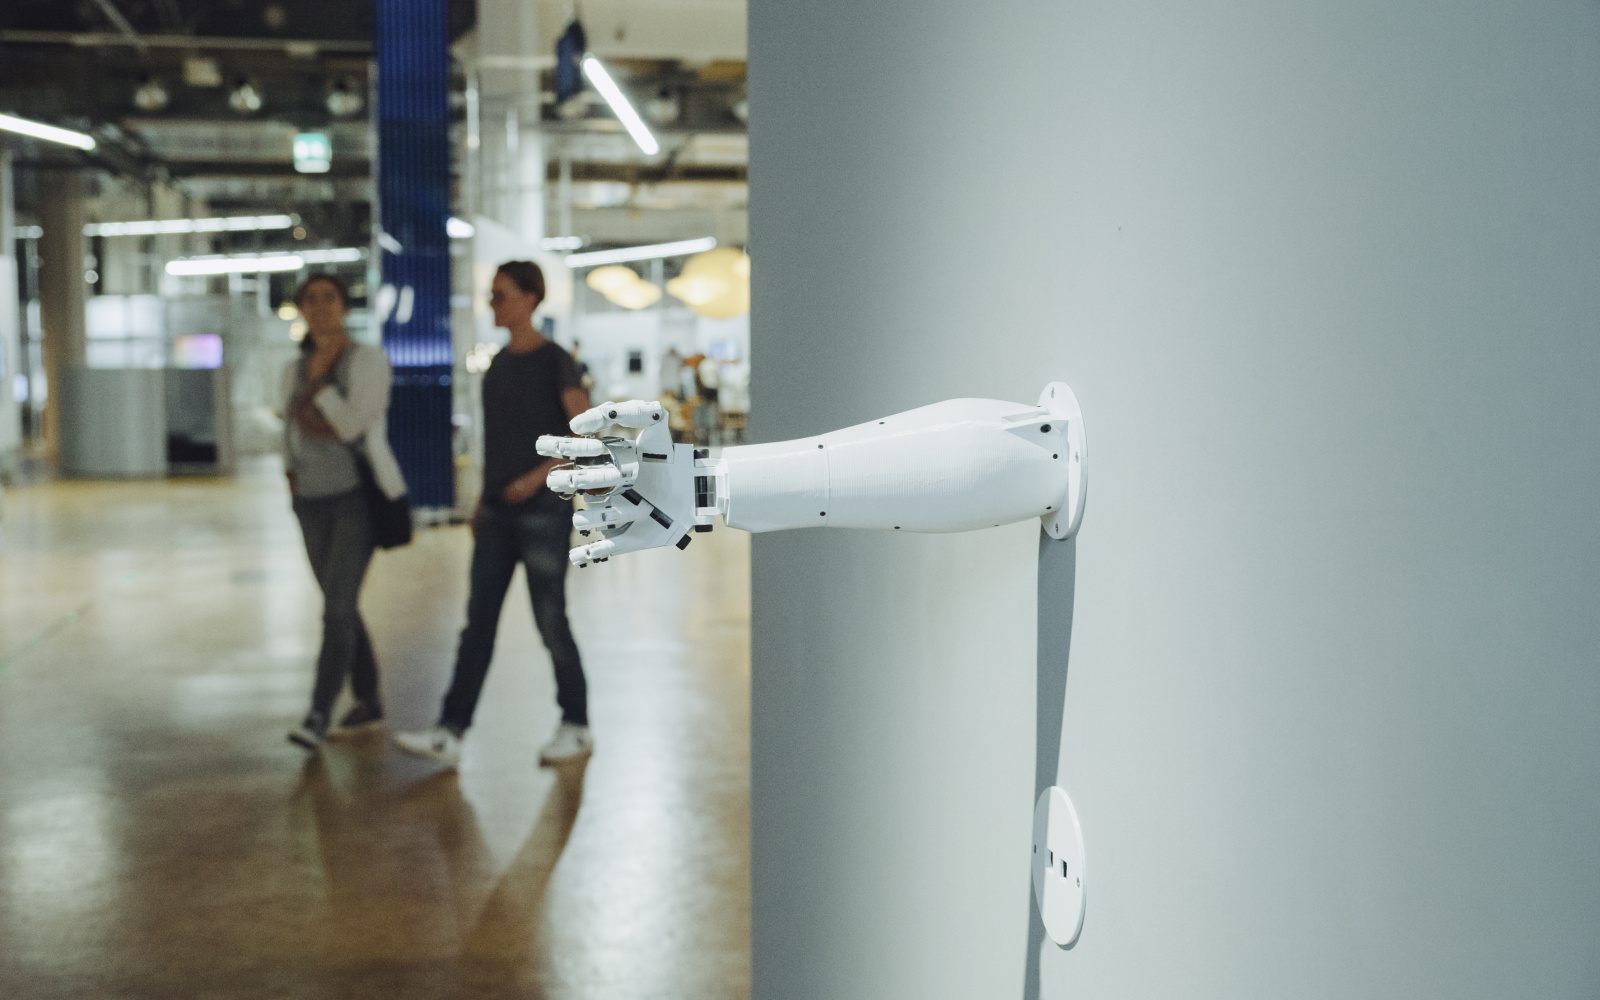 A robot arm protrudes from a wall whose hand holds something enclosed.